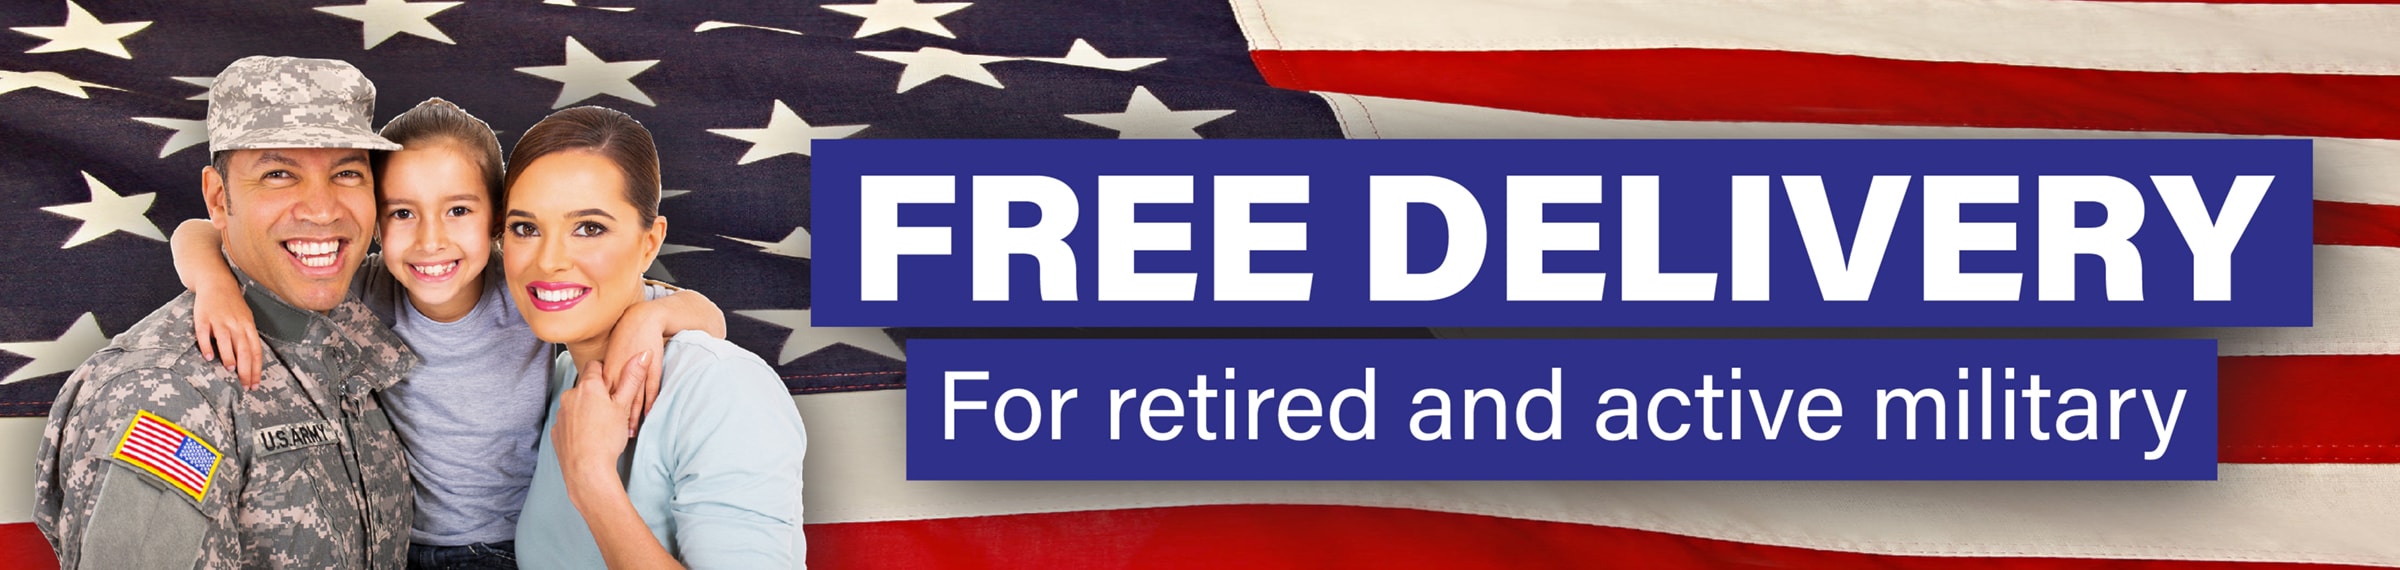 Free Delivery for retired and active military